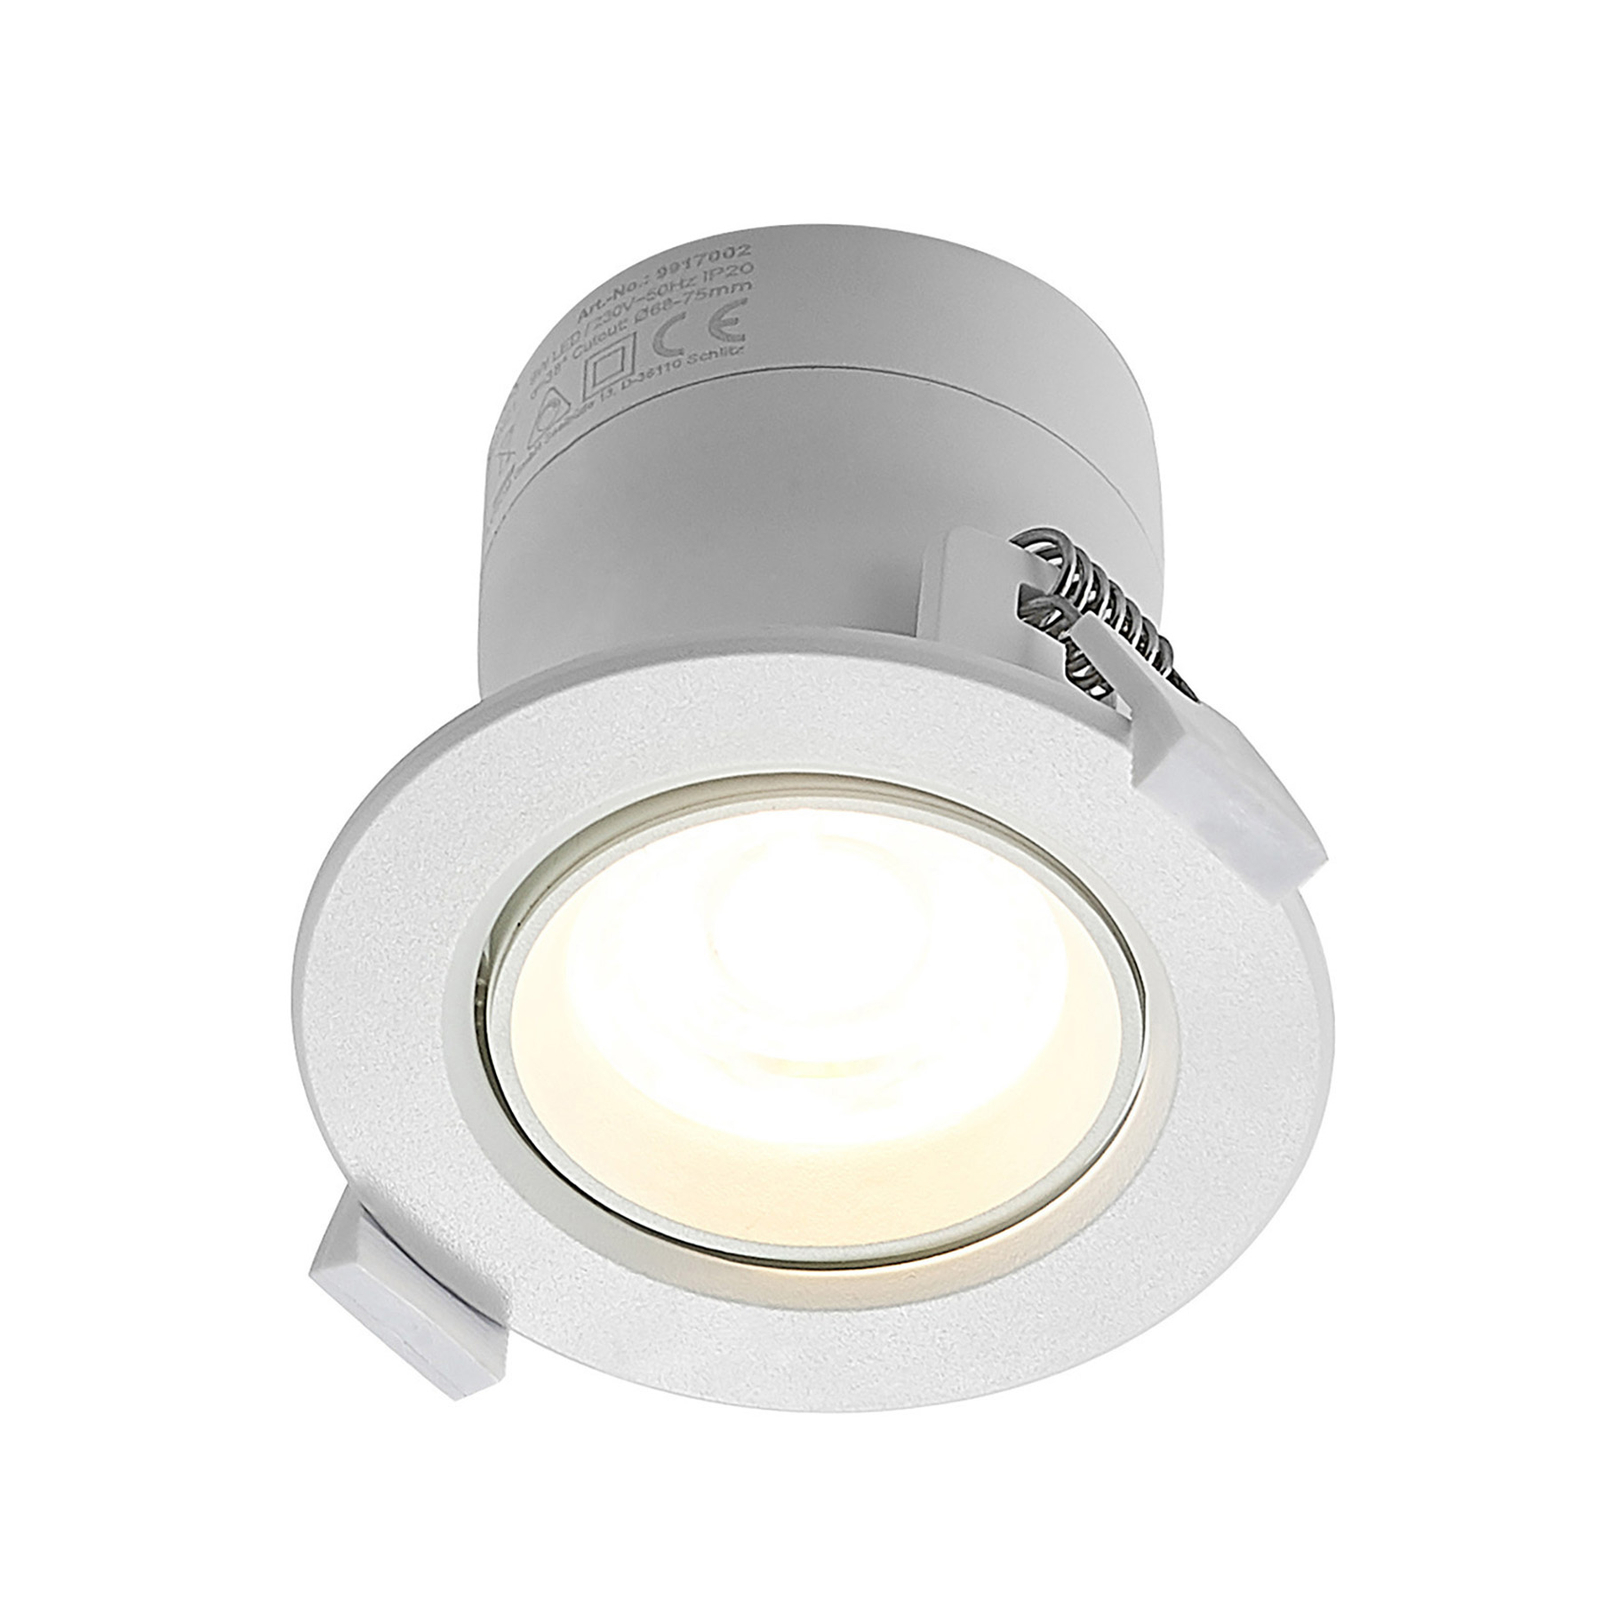 Prios LED recessed light Shima, white, 9W, 3000K, 3pcs, dimmable